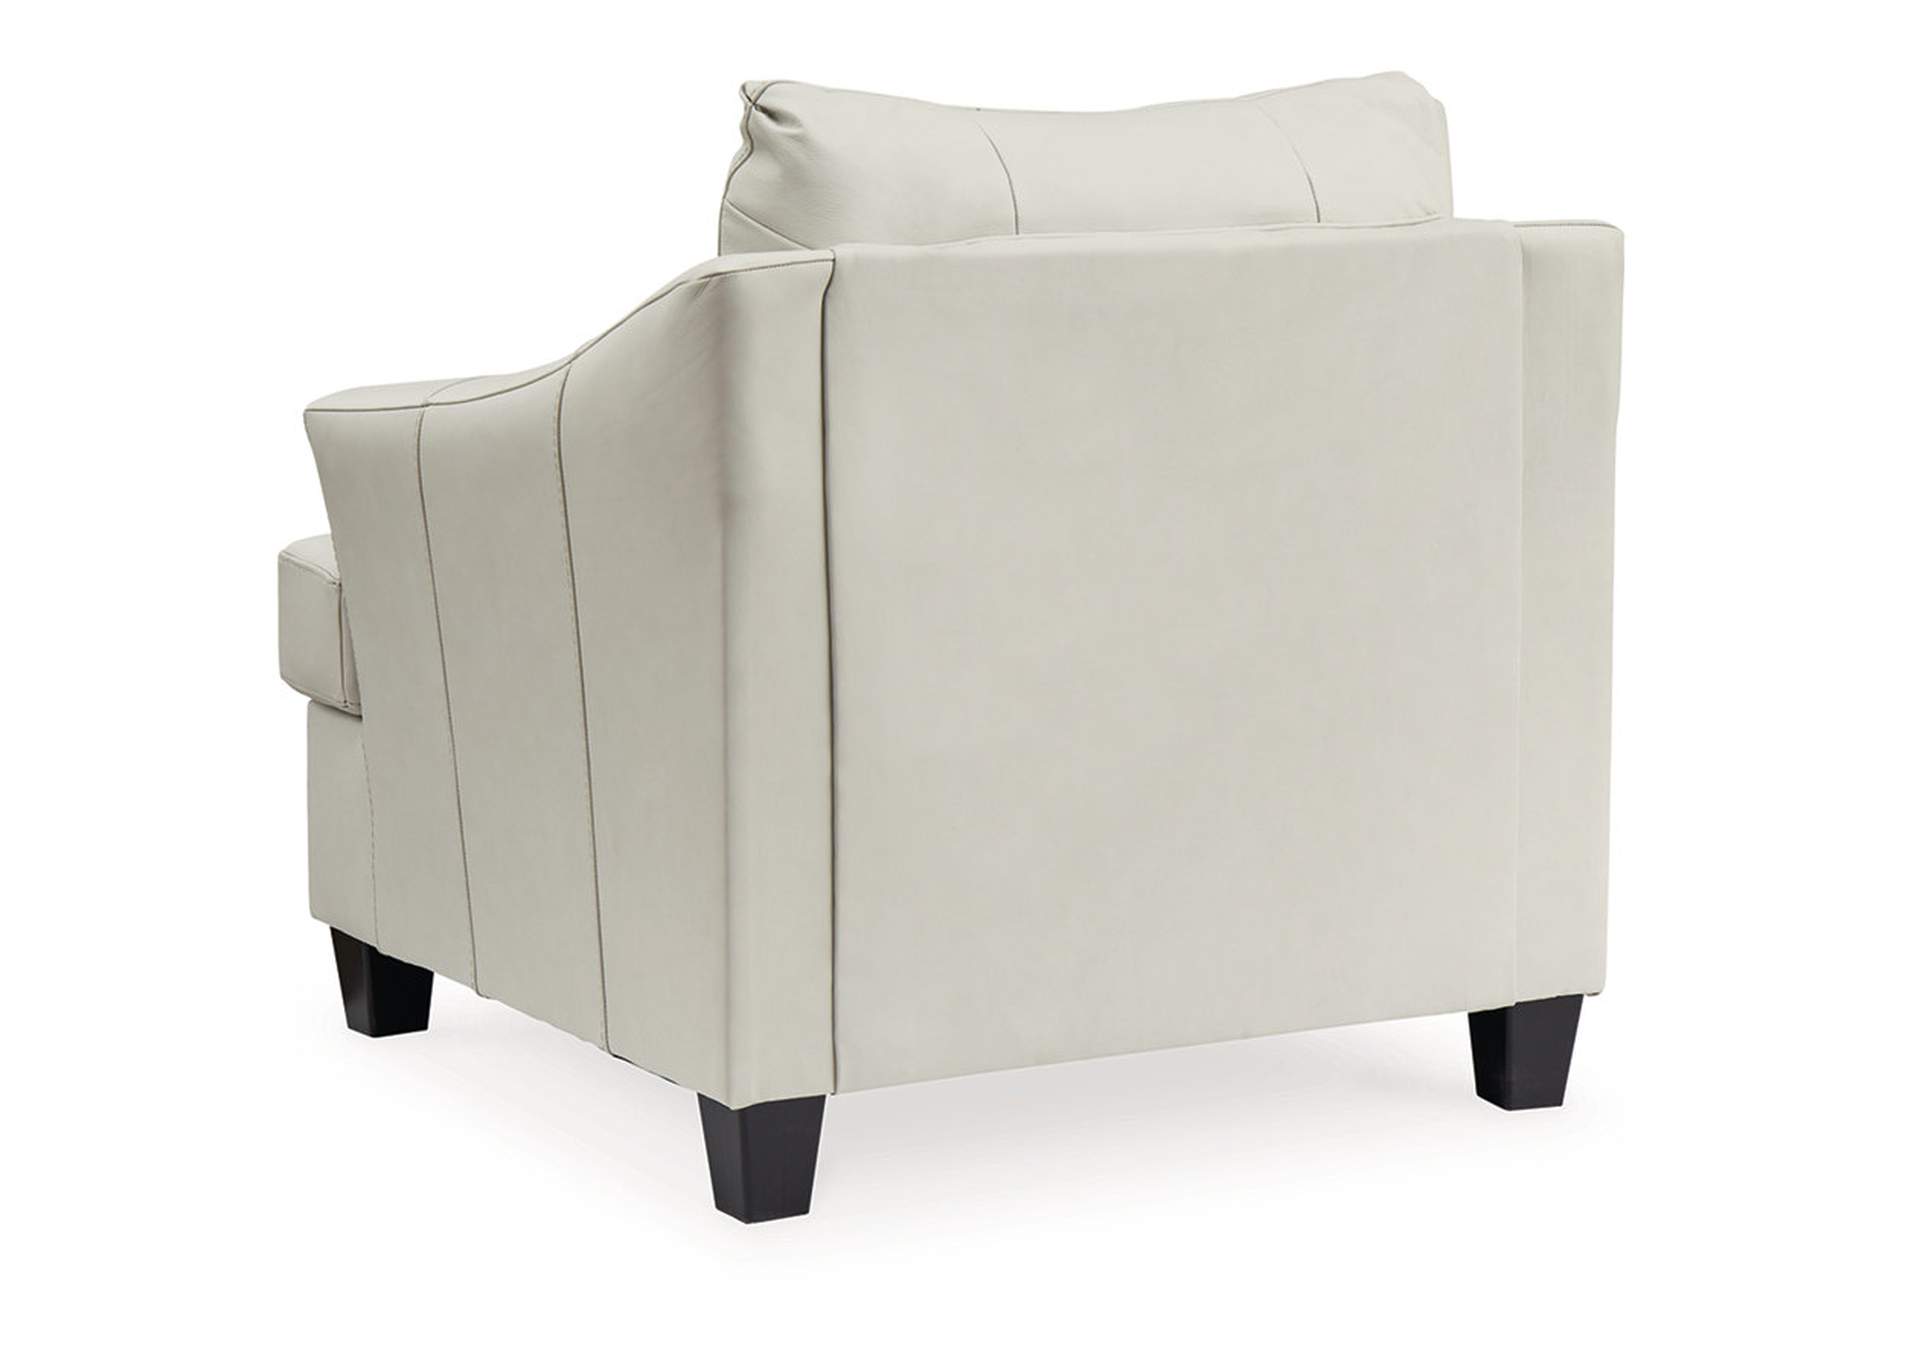 Genoa Oversized Chair,Signature Design By Ashley